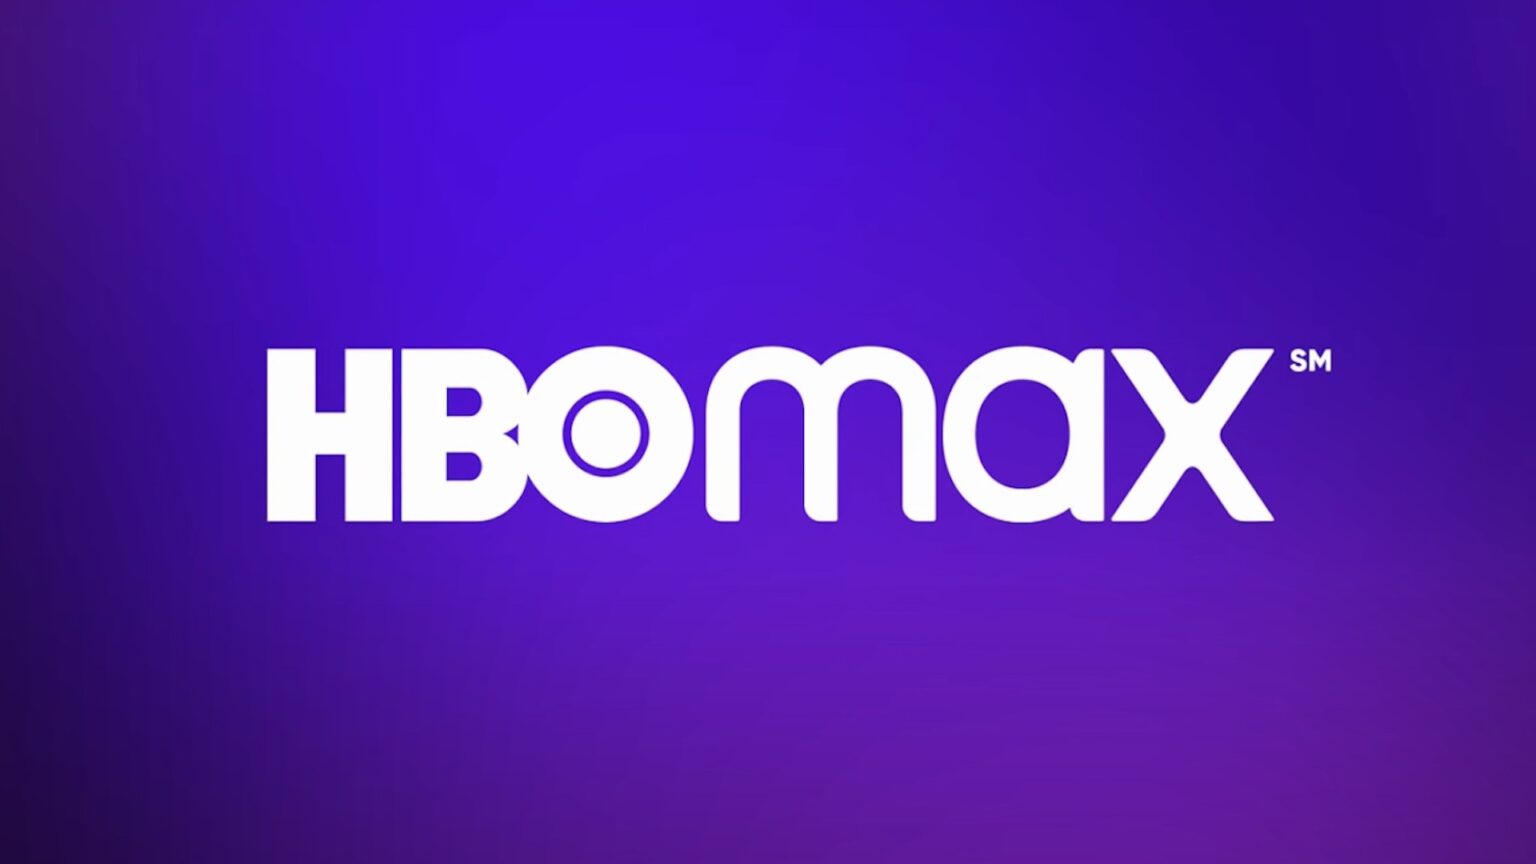 A brand new month also means brand new movies heading to HBO Max. Check out all the great movies that will be available to enjoy on the service this month.